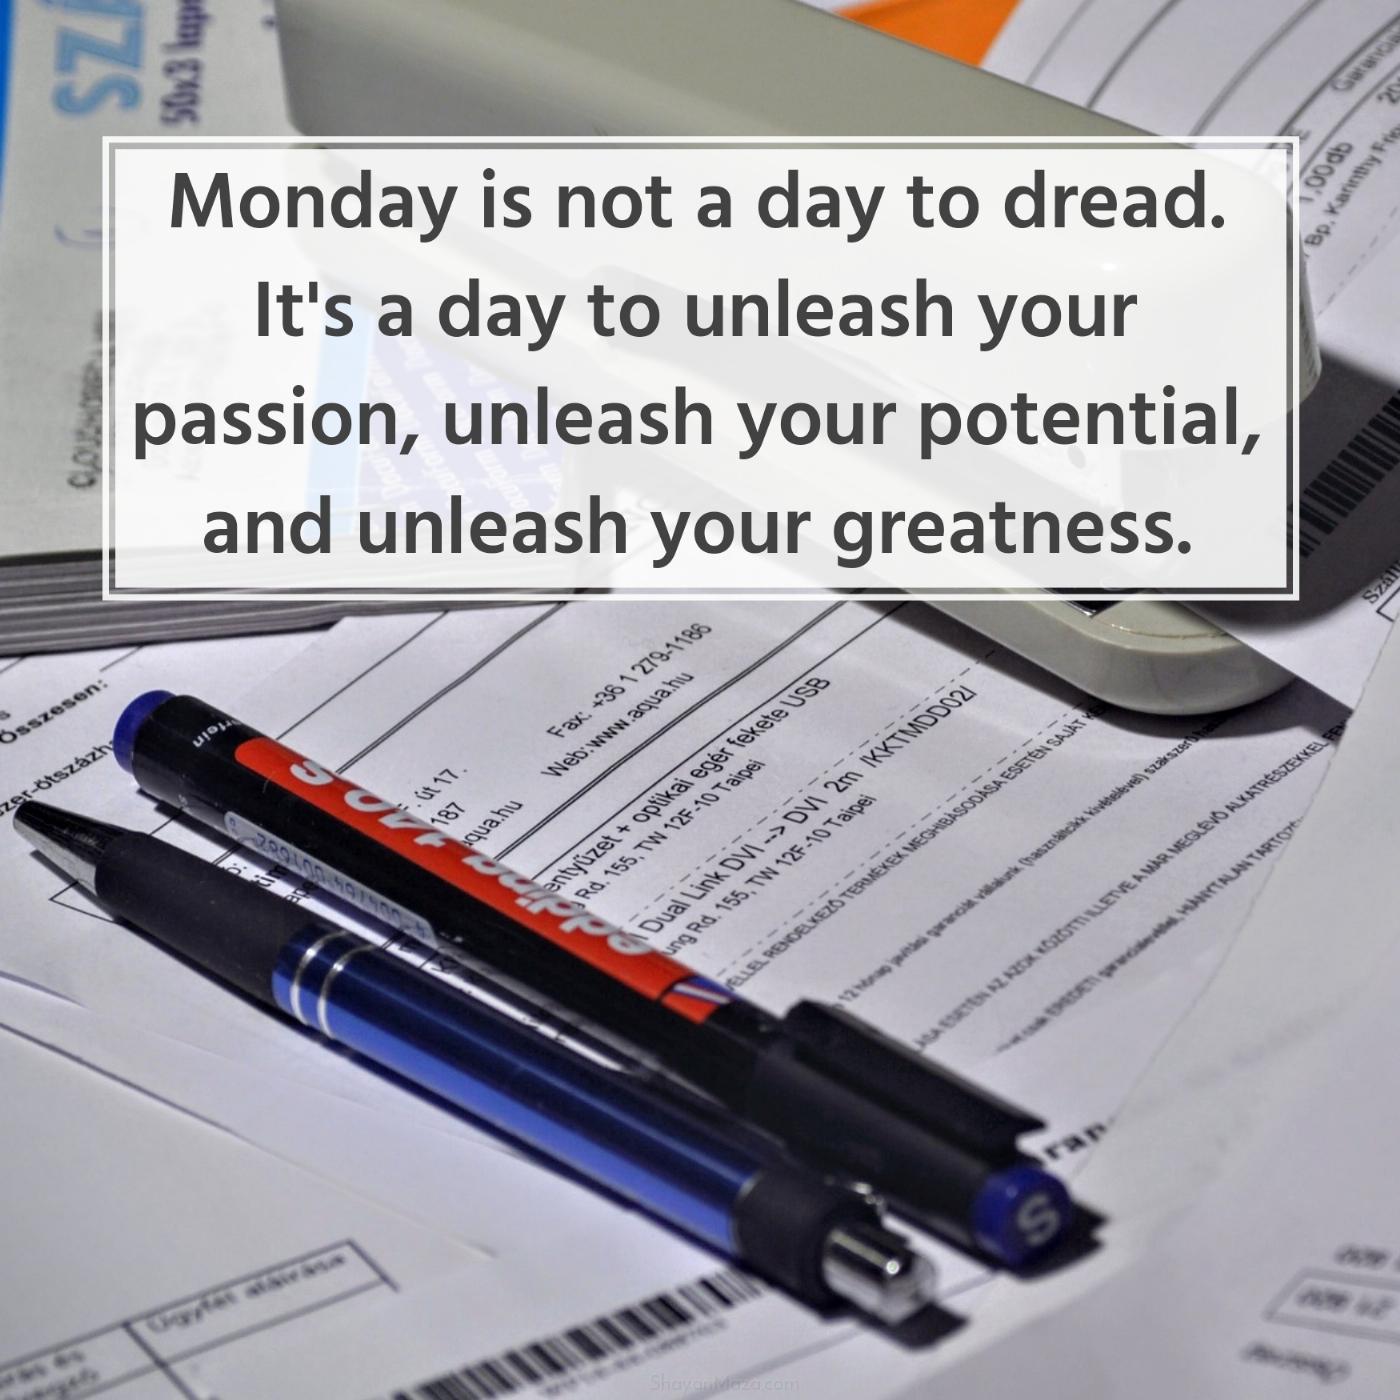 Monday is not a day to dread It's a day to unleash your passion